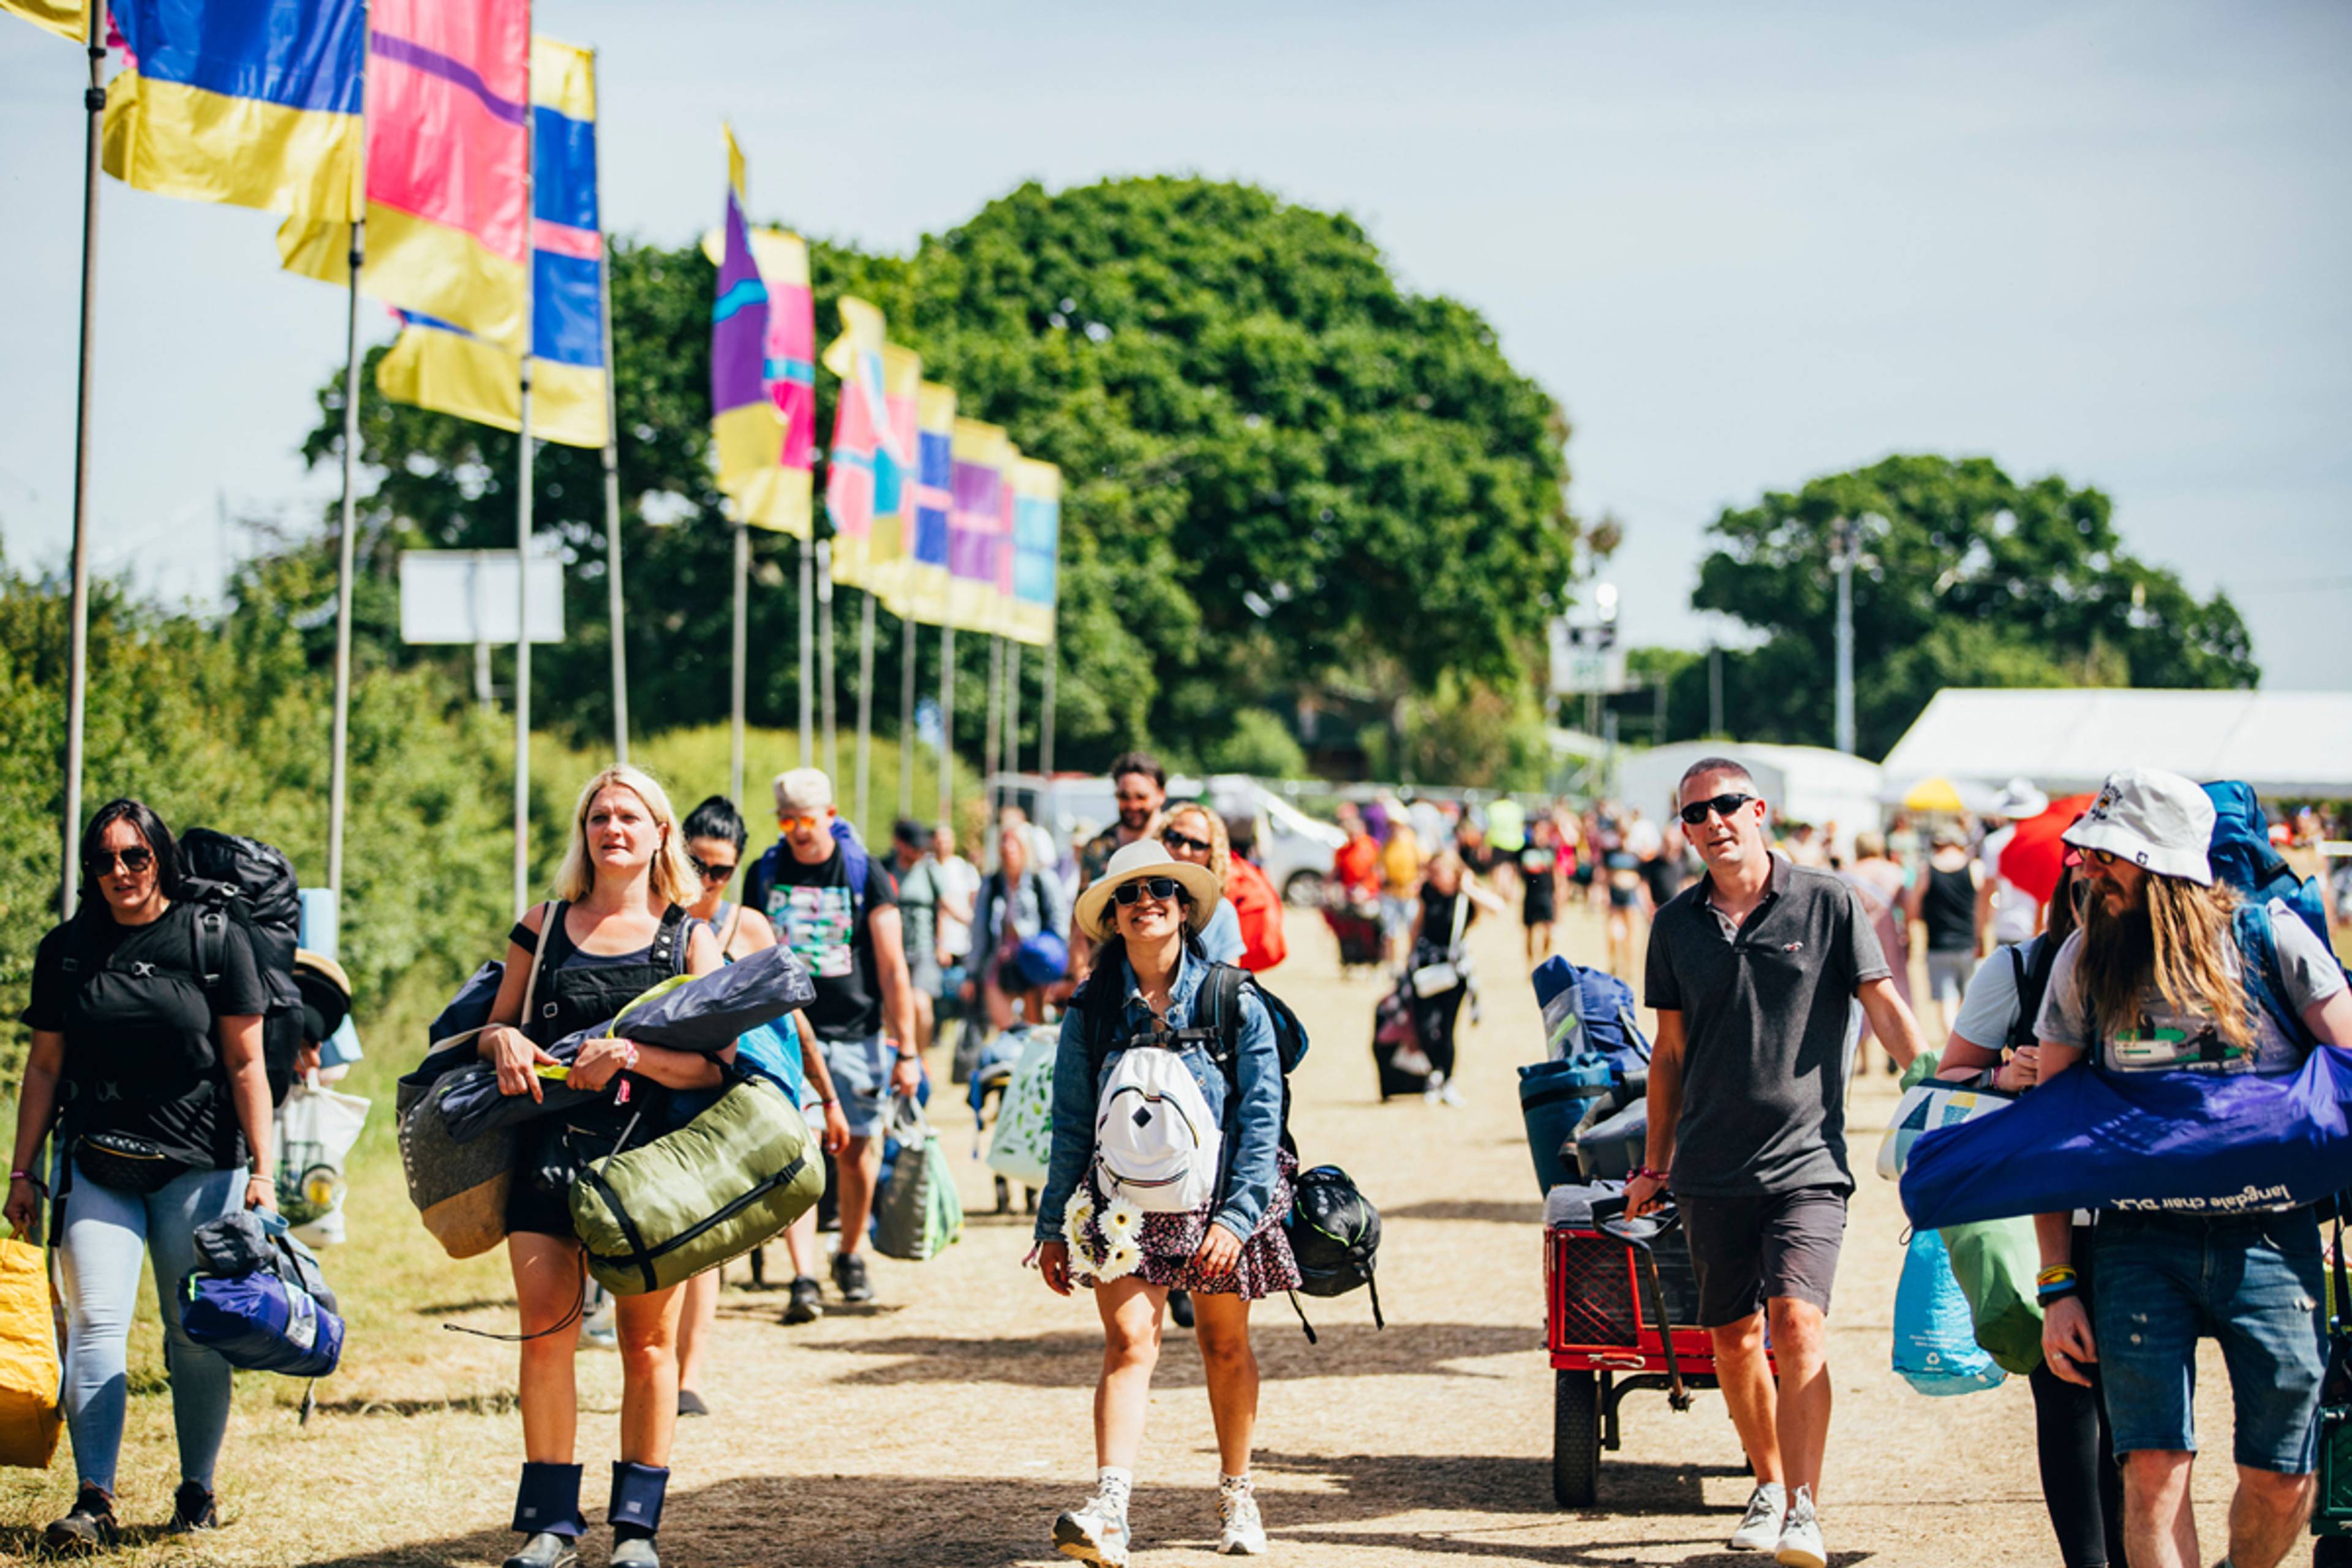 People walking at a festival with camping gear